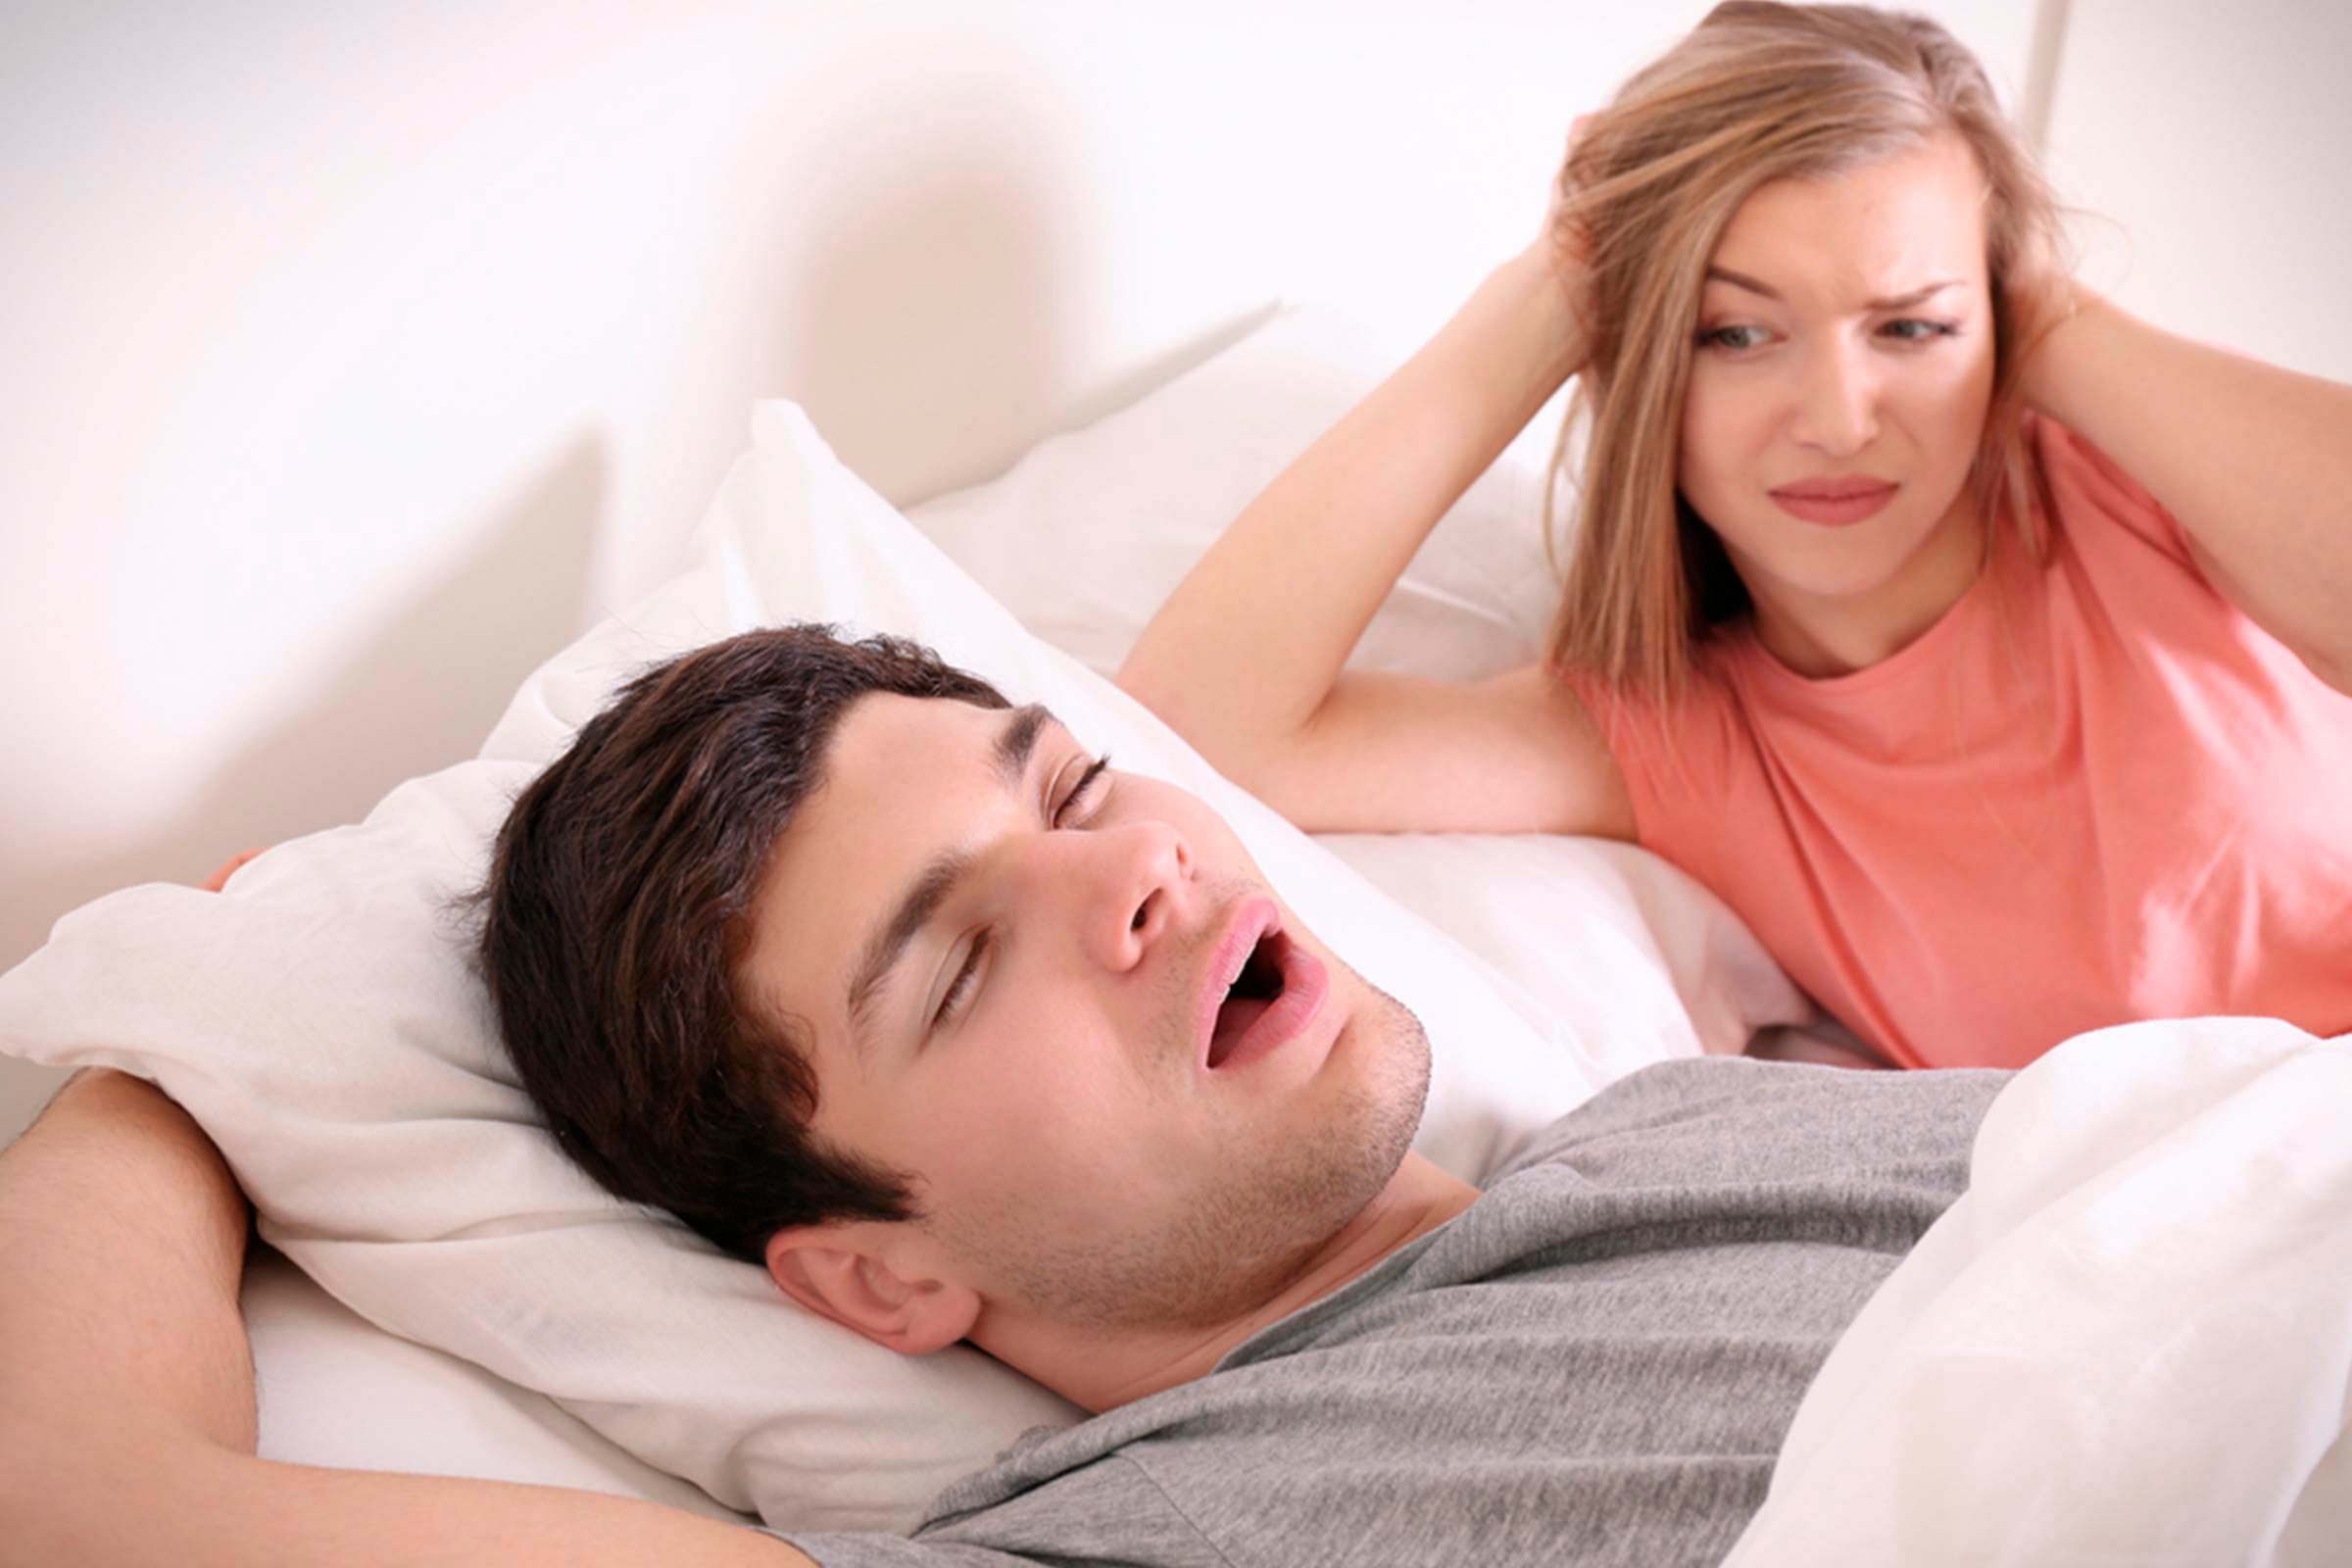 Why Married Couples Should Sleep in Separate Beds